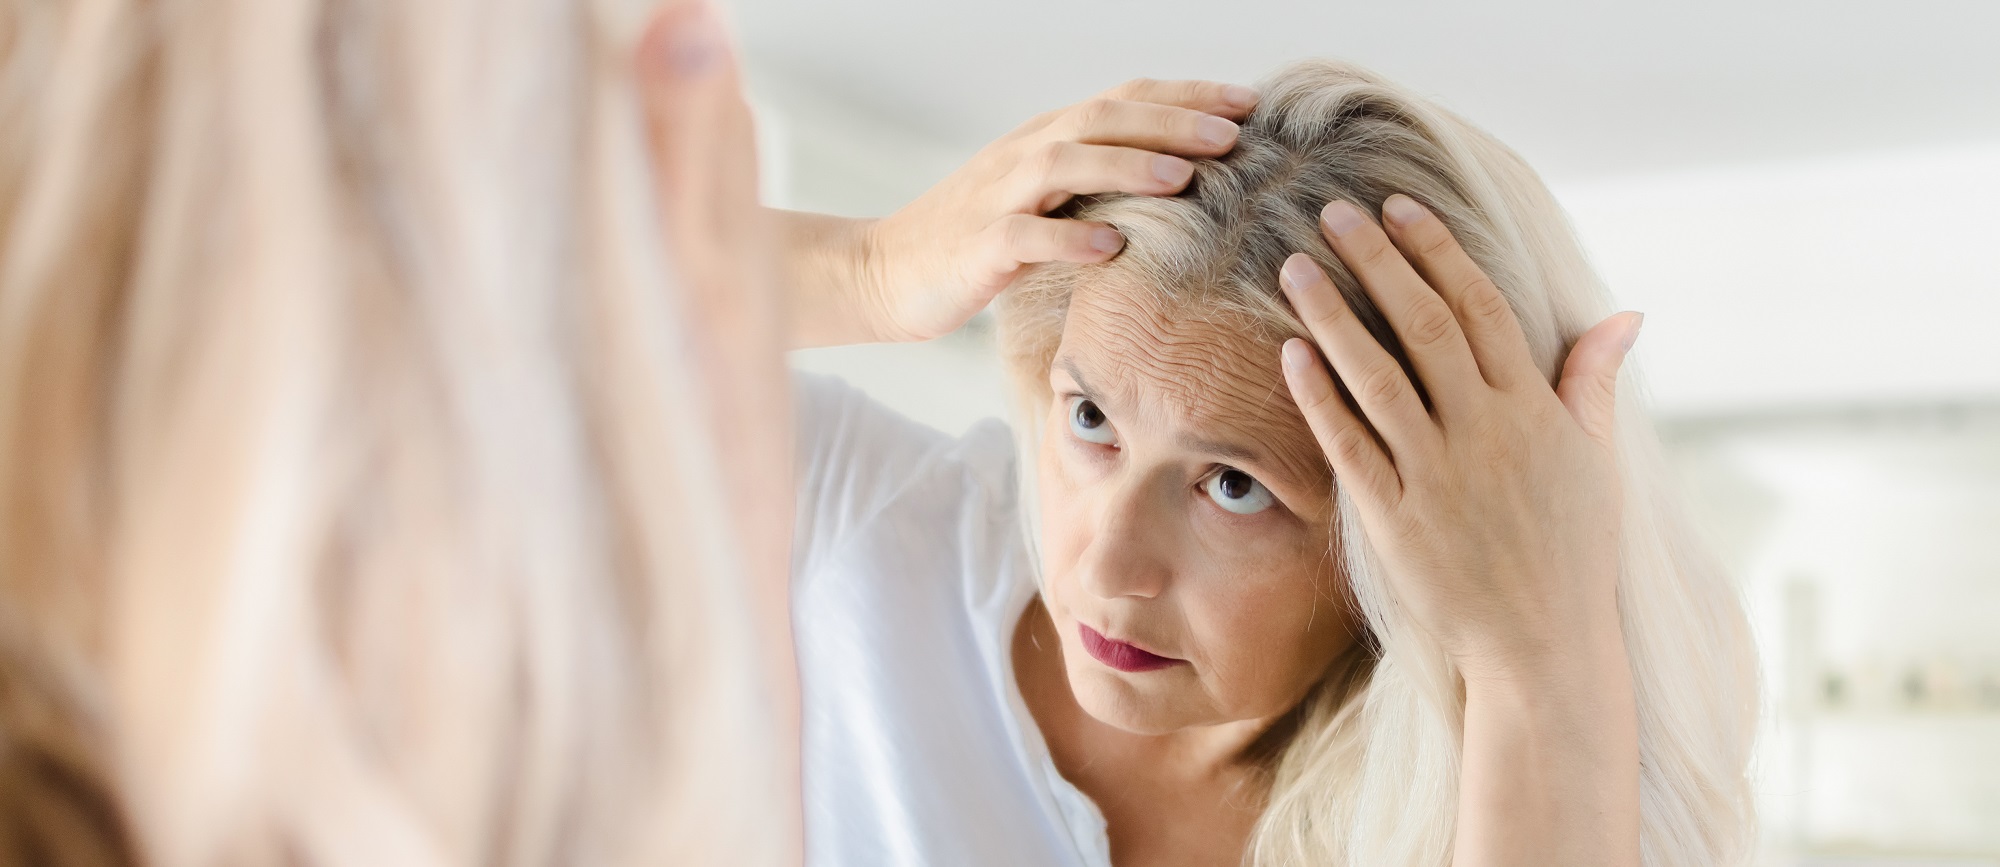 Hair Loss In Women After 50 What To Do  Prime Women  An Online Magazine